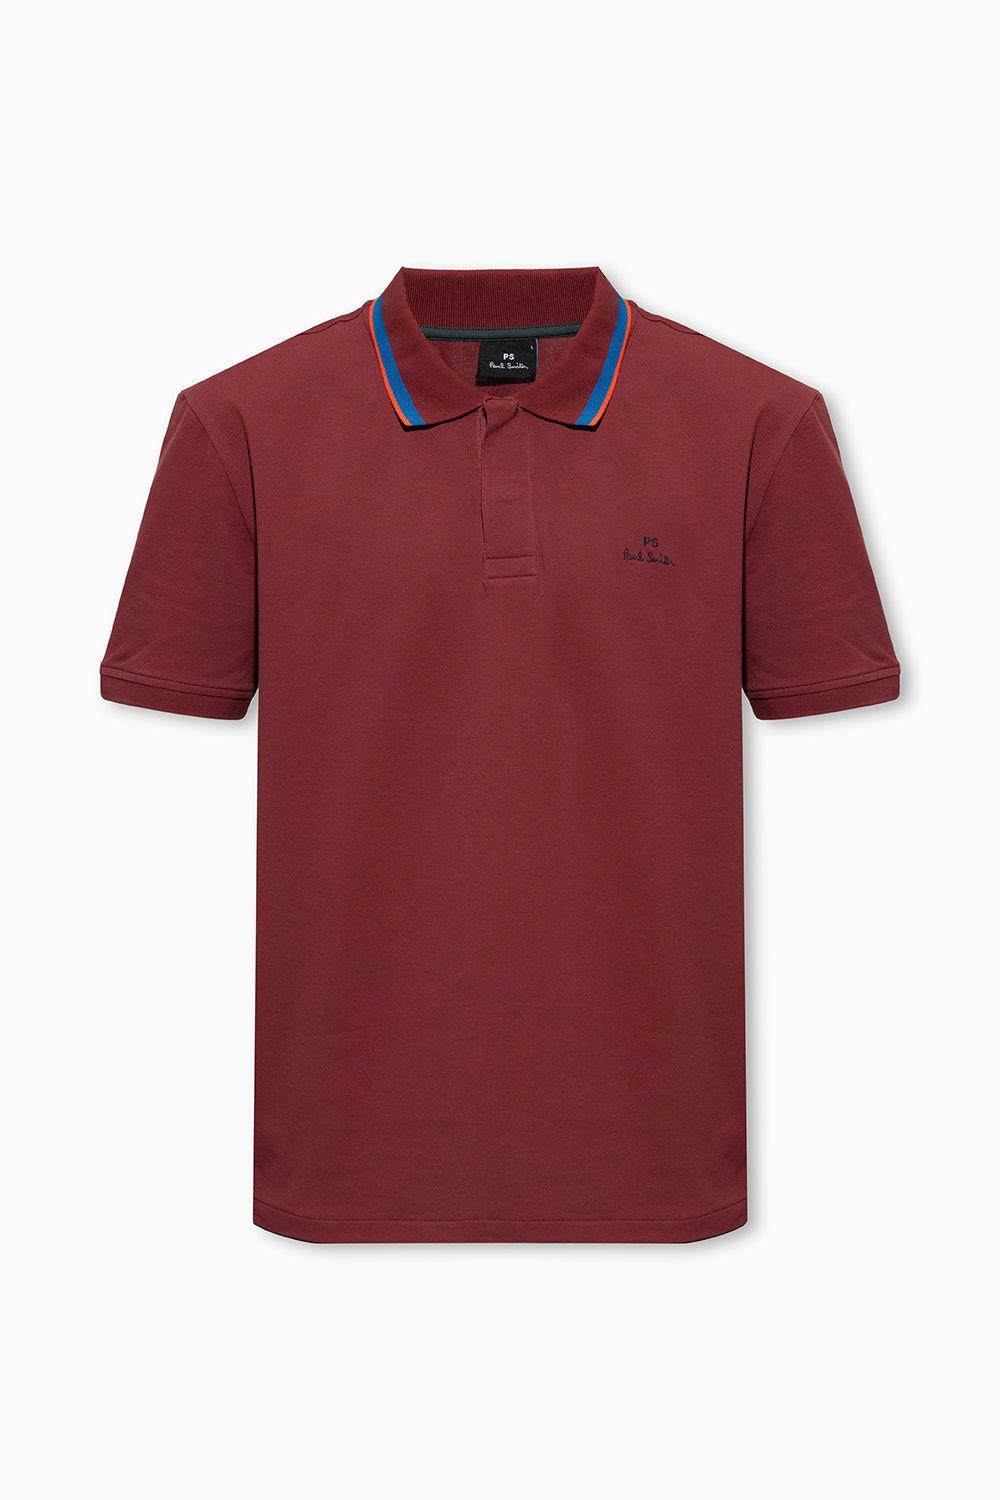 PS by Paul Smith Polo Shirt With Logo in Red for Men | Lyst